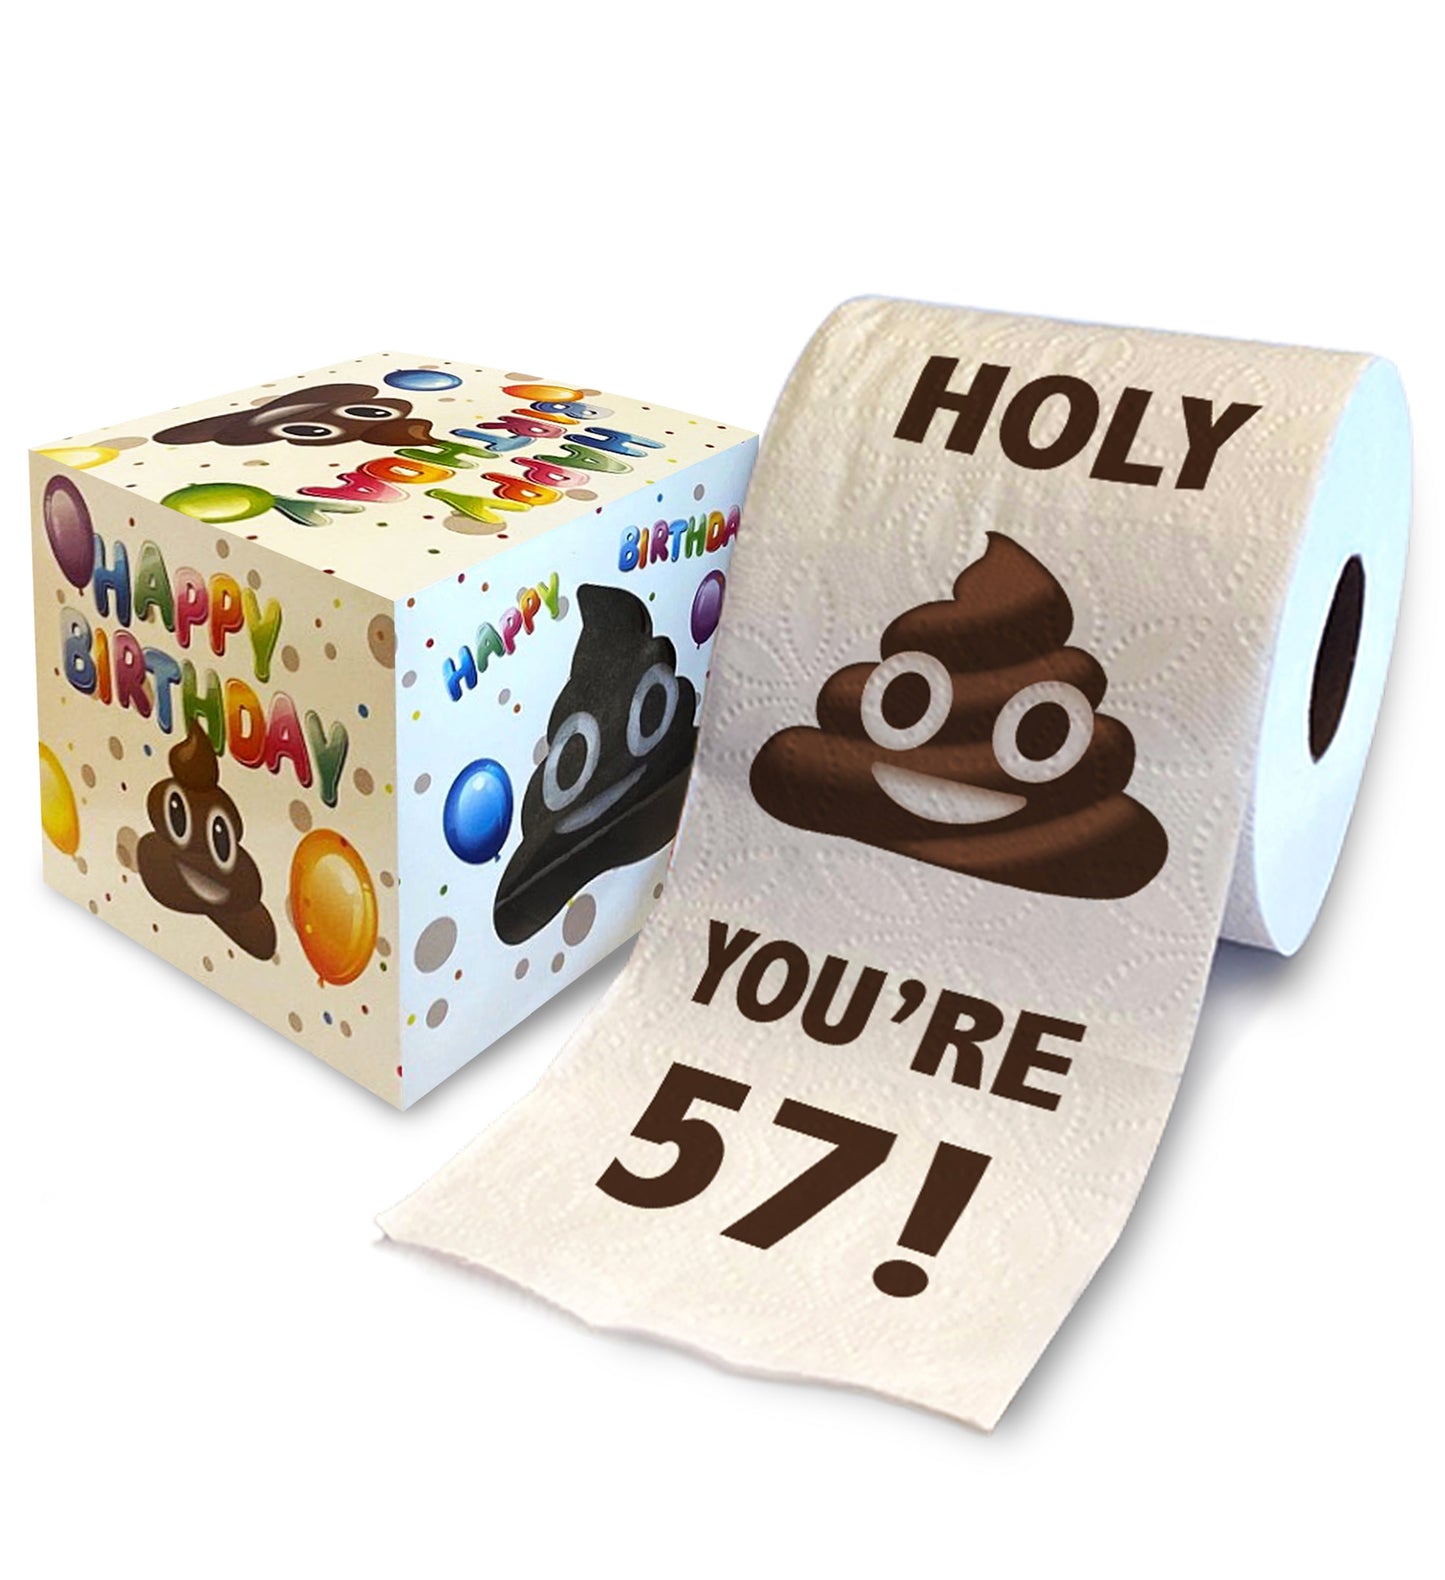 Printed TP Holy Poop You're 57 Funny Toilet Paper Roll Birthday Party Gag Gift